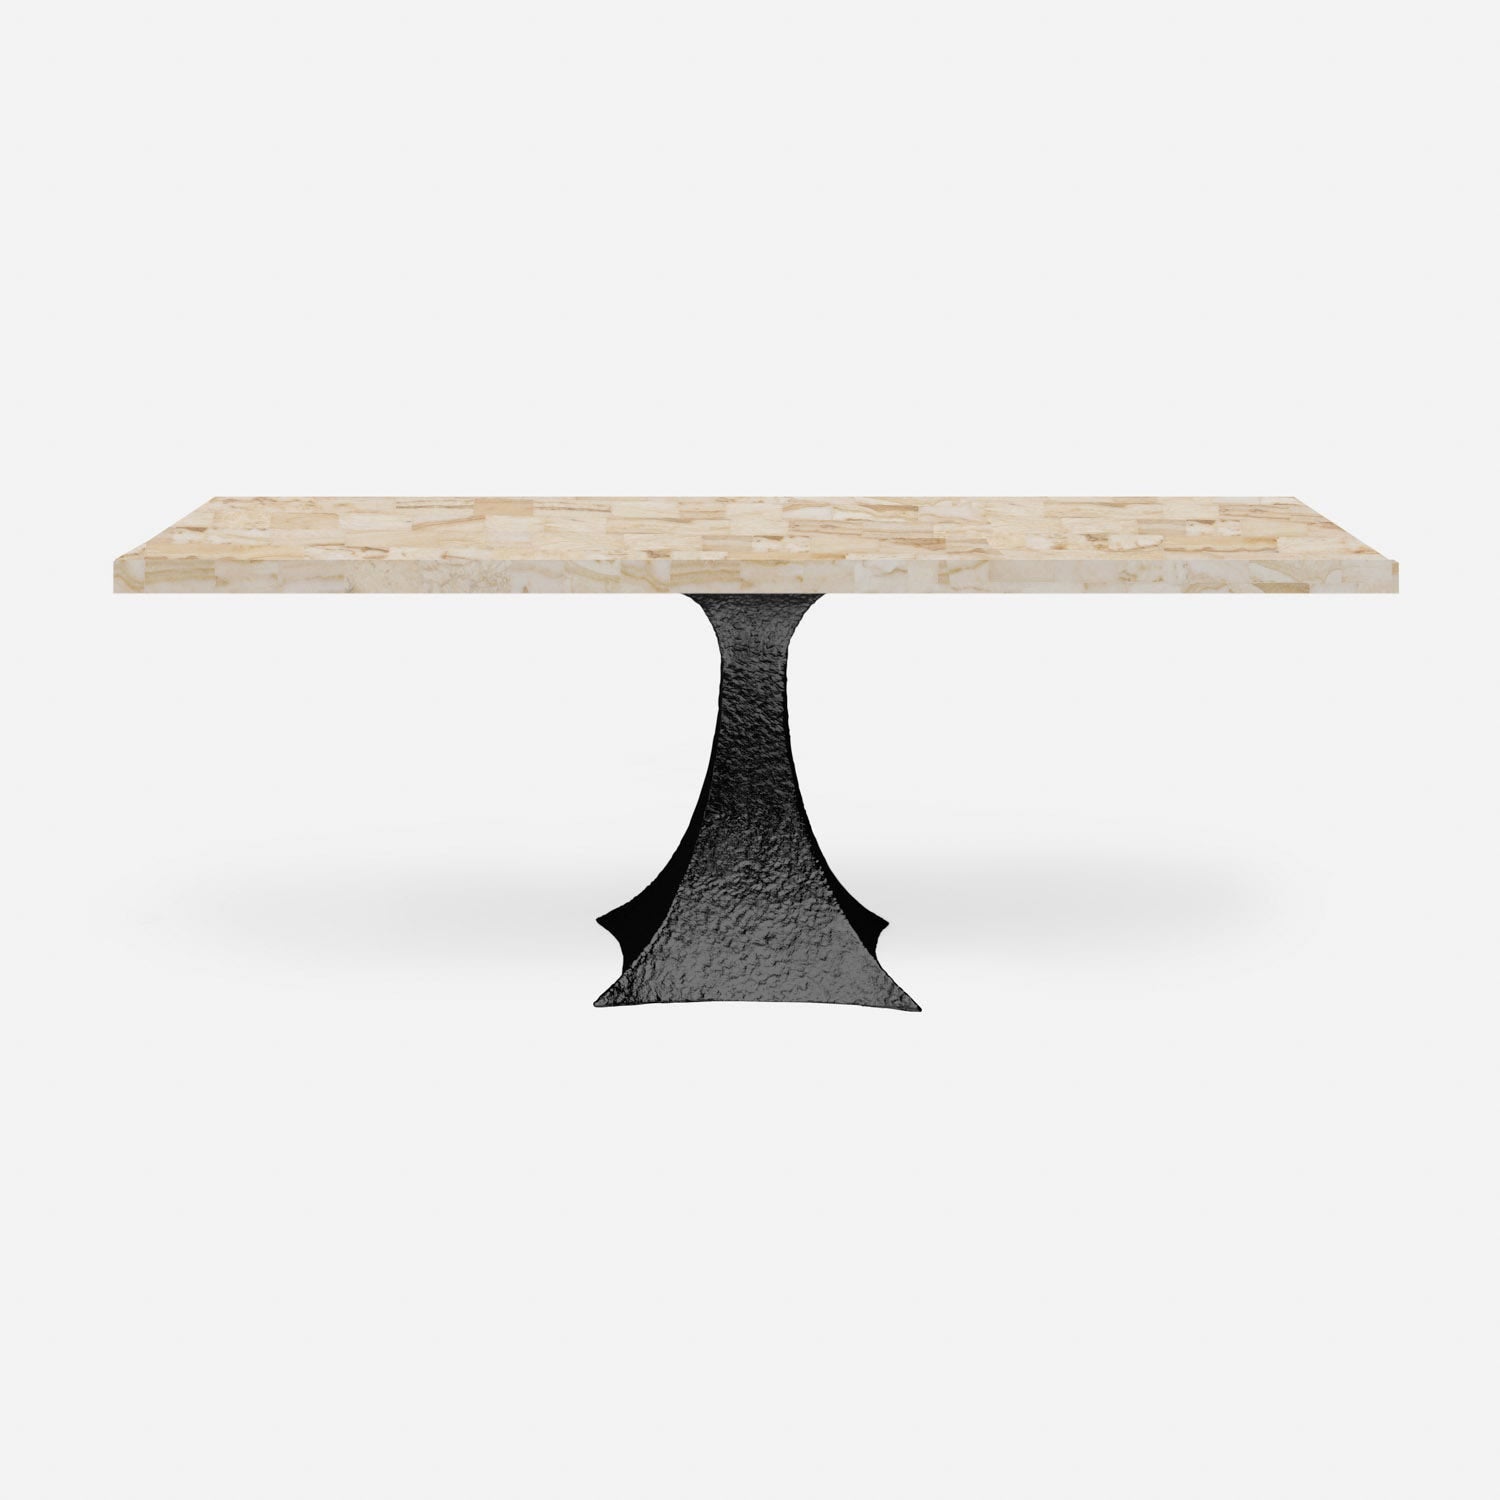 Made Goods Noor 72" x 40" x 30" Bumpy Black Iron Dinning Table With Rectangle Dark Faux Horn Table Top